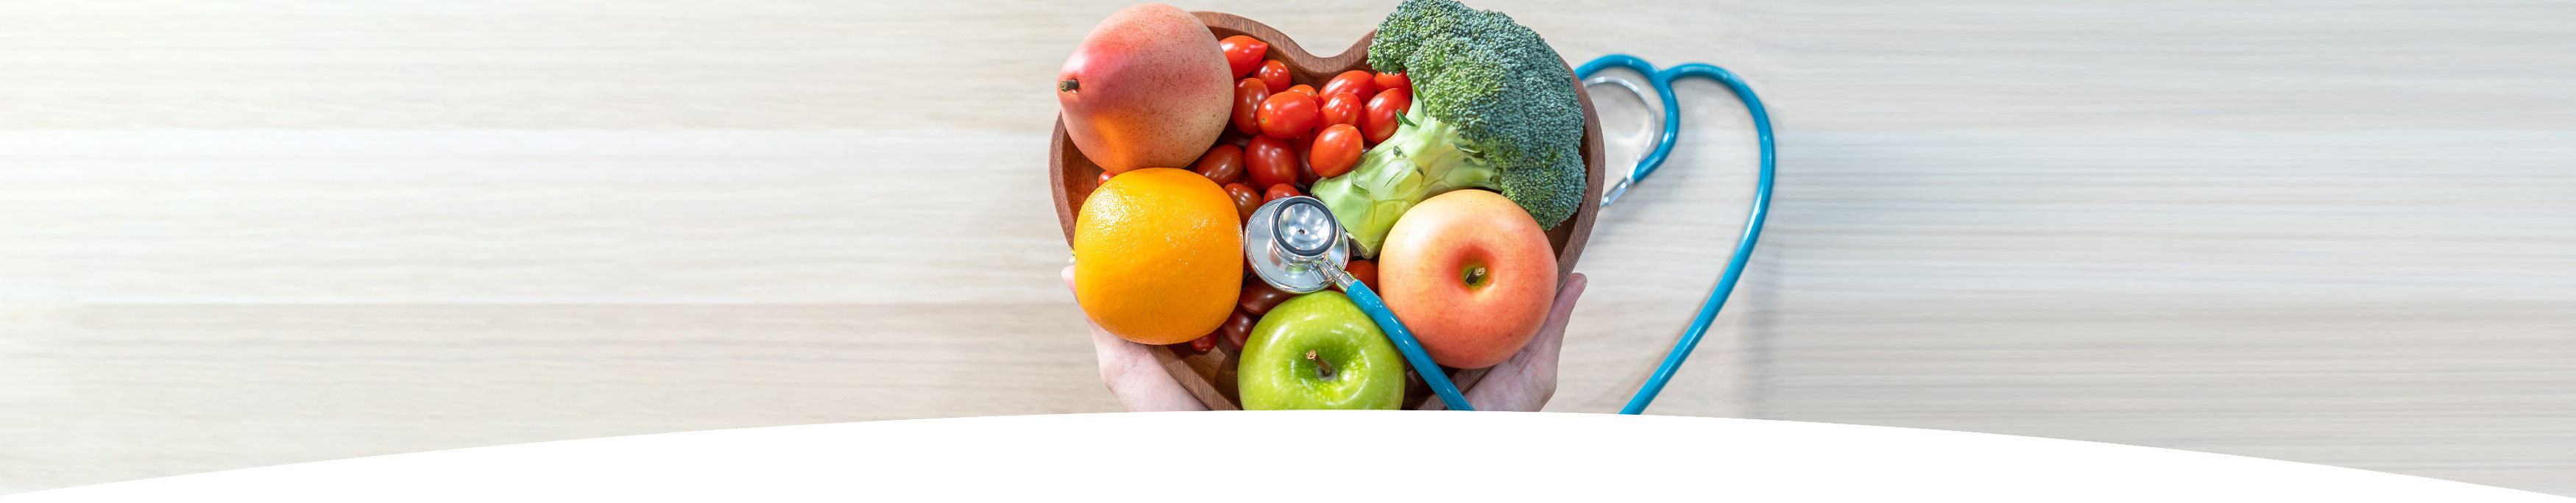 Banner picture of a heart shaped wooden bowl with cherry tomatoes, broccoli, apples, and an orange. There is a stethoscope in the bowl of the cherry tomatoes and the other end is on the table.